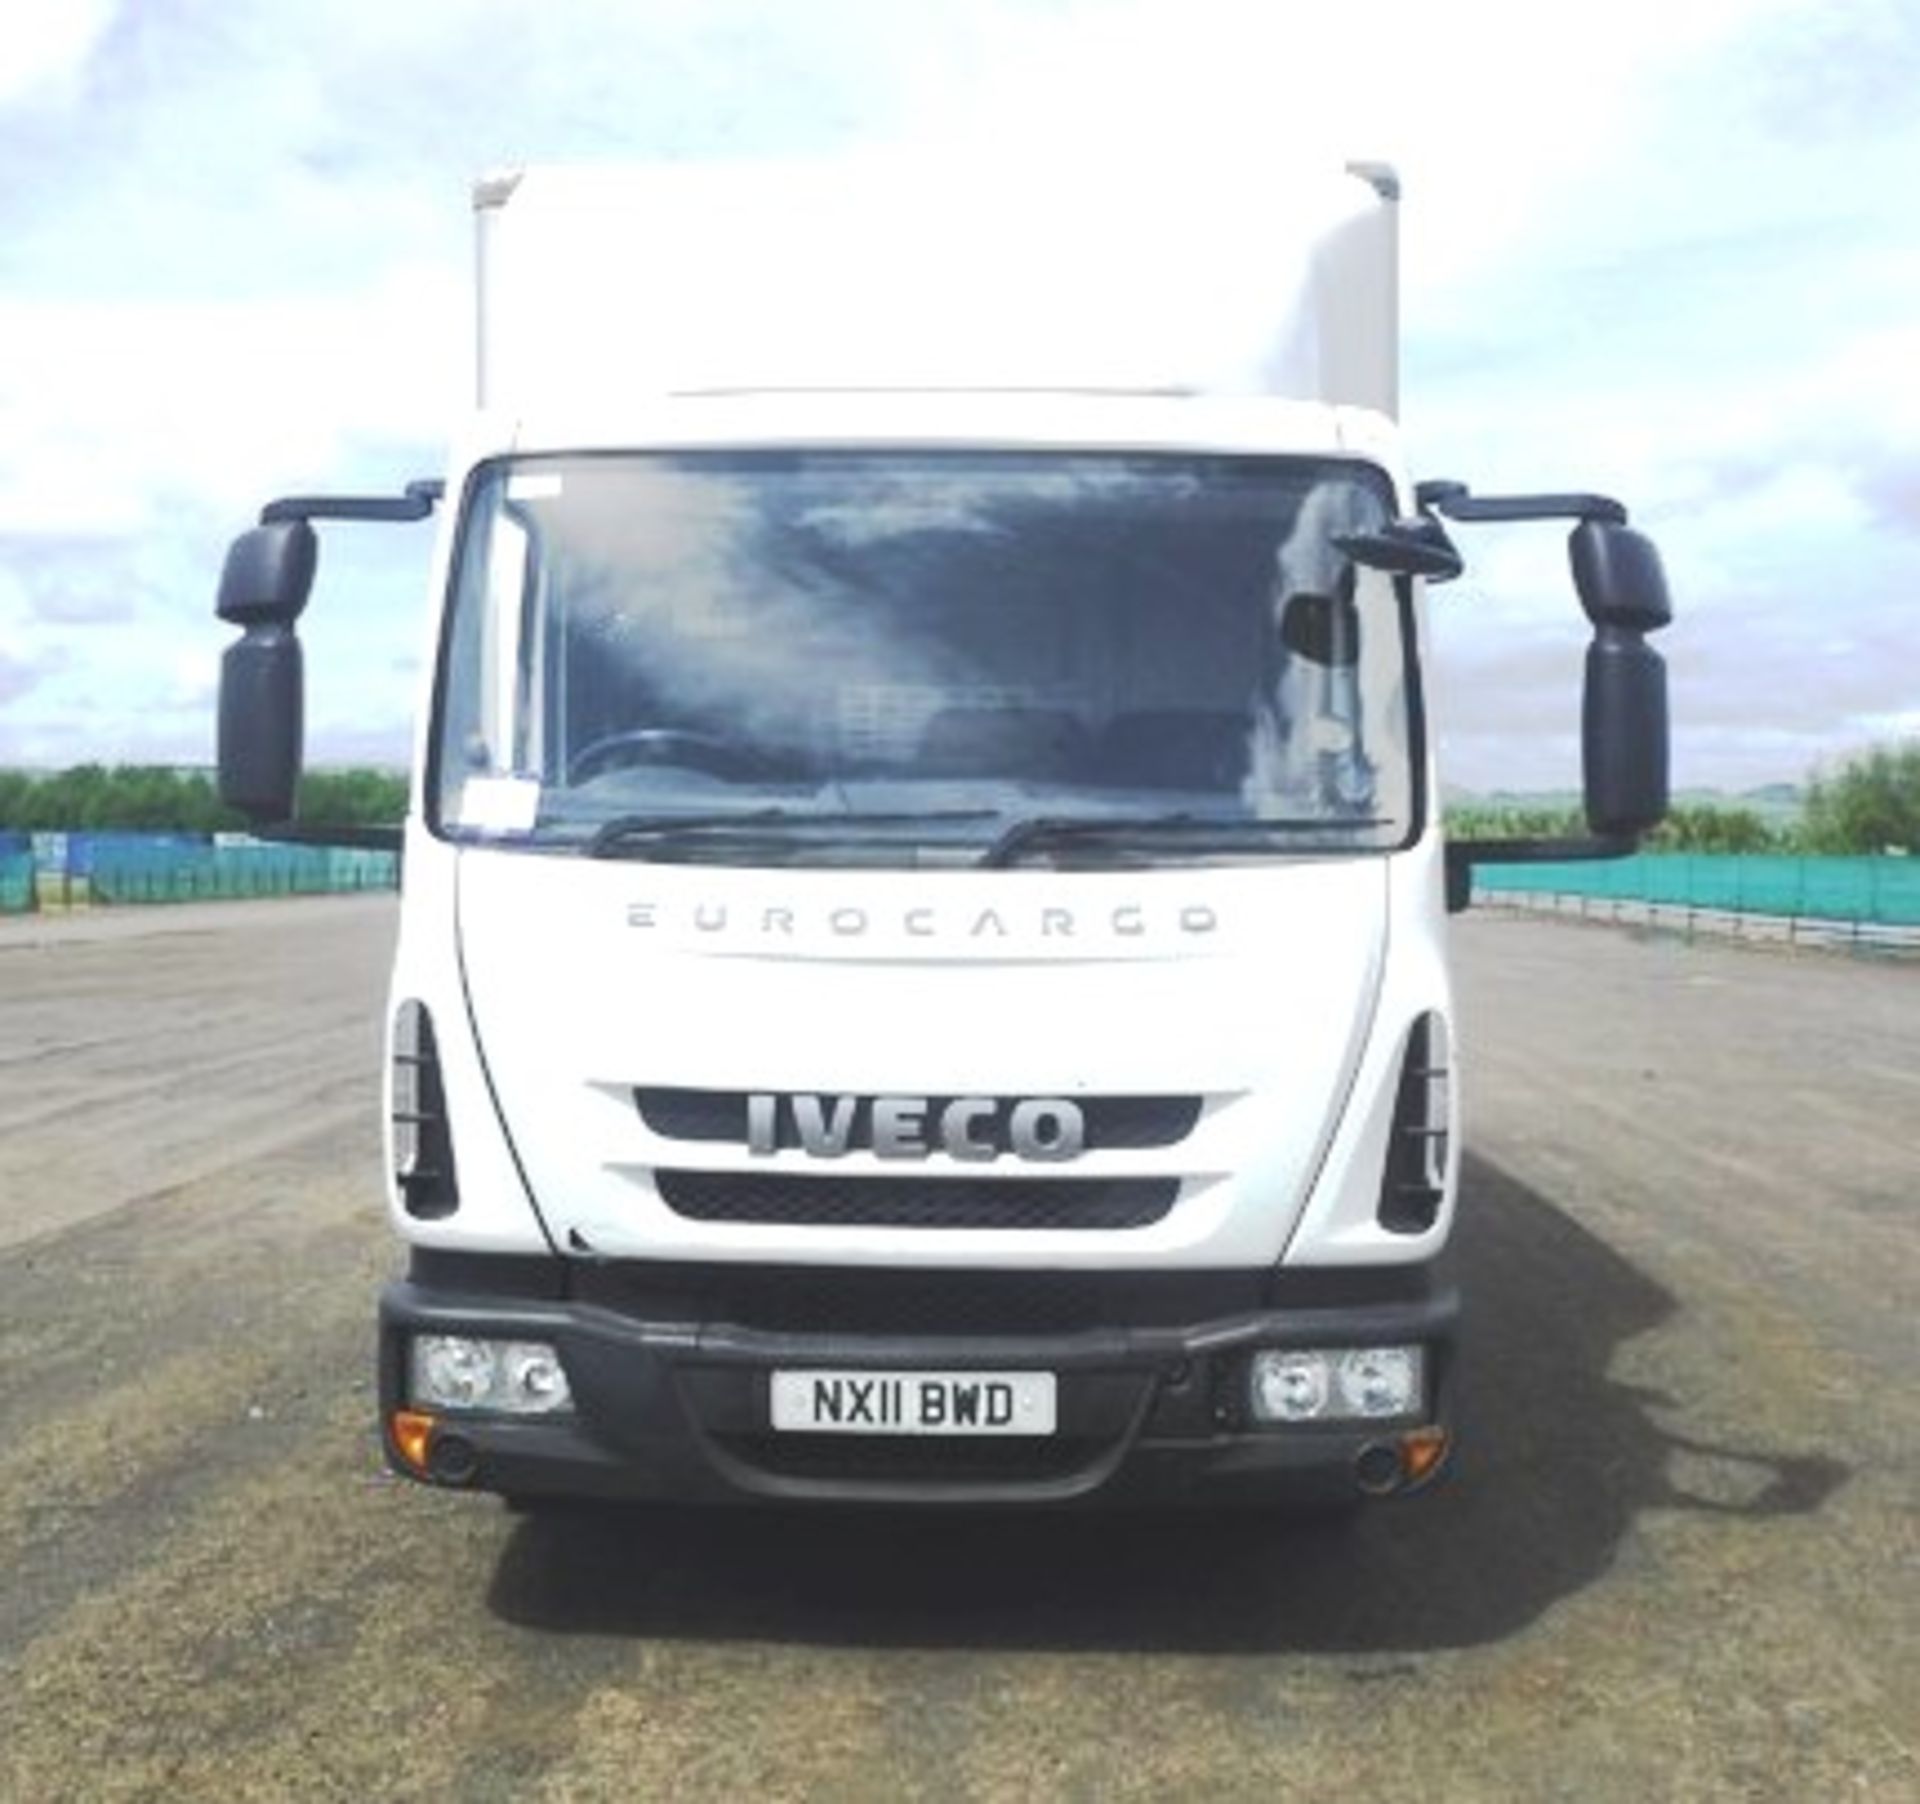 IVECO MODEL EUROCARGO (MY 2008) - 3920cc - Image 3 of 27